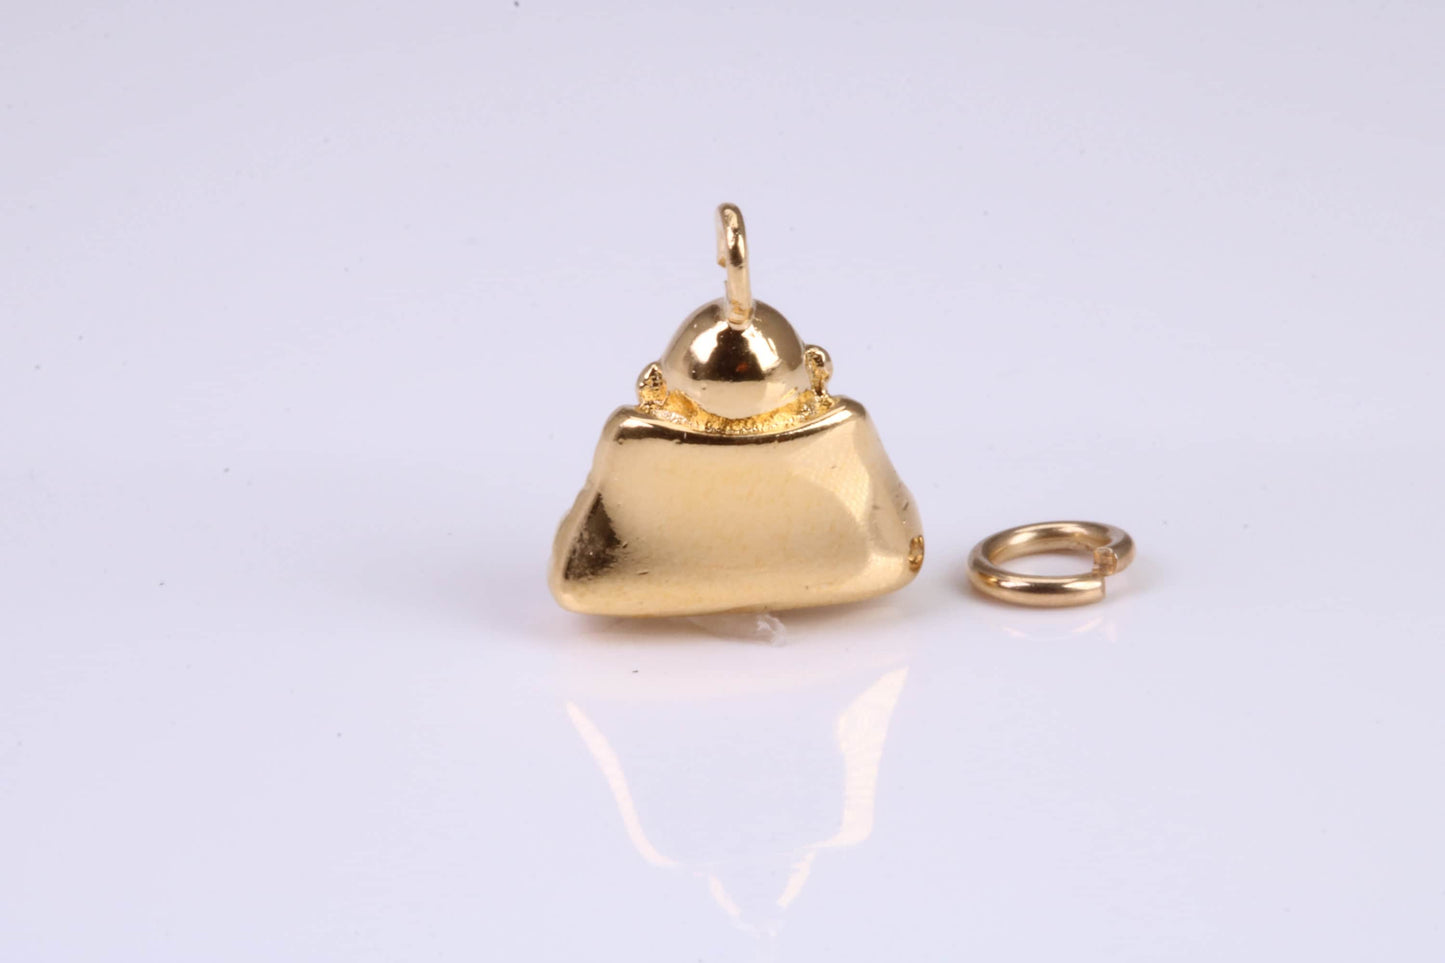 Buddha Charm, Traditional Charm, Made from Solid Yellow Gold, British Hallmarked, Complete with Attachment Link